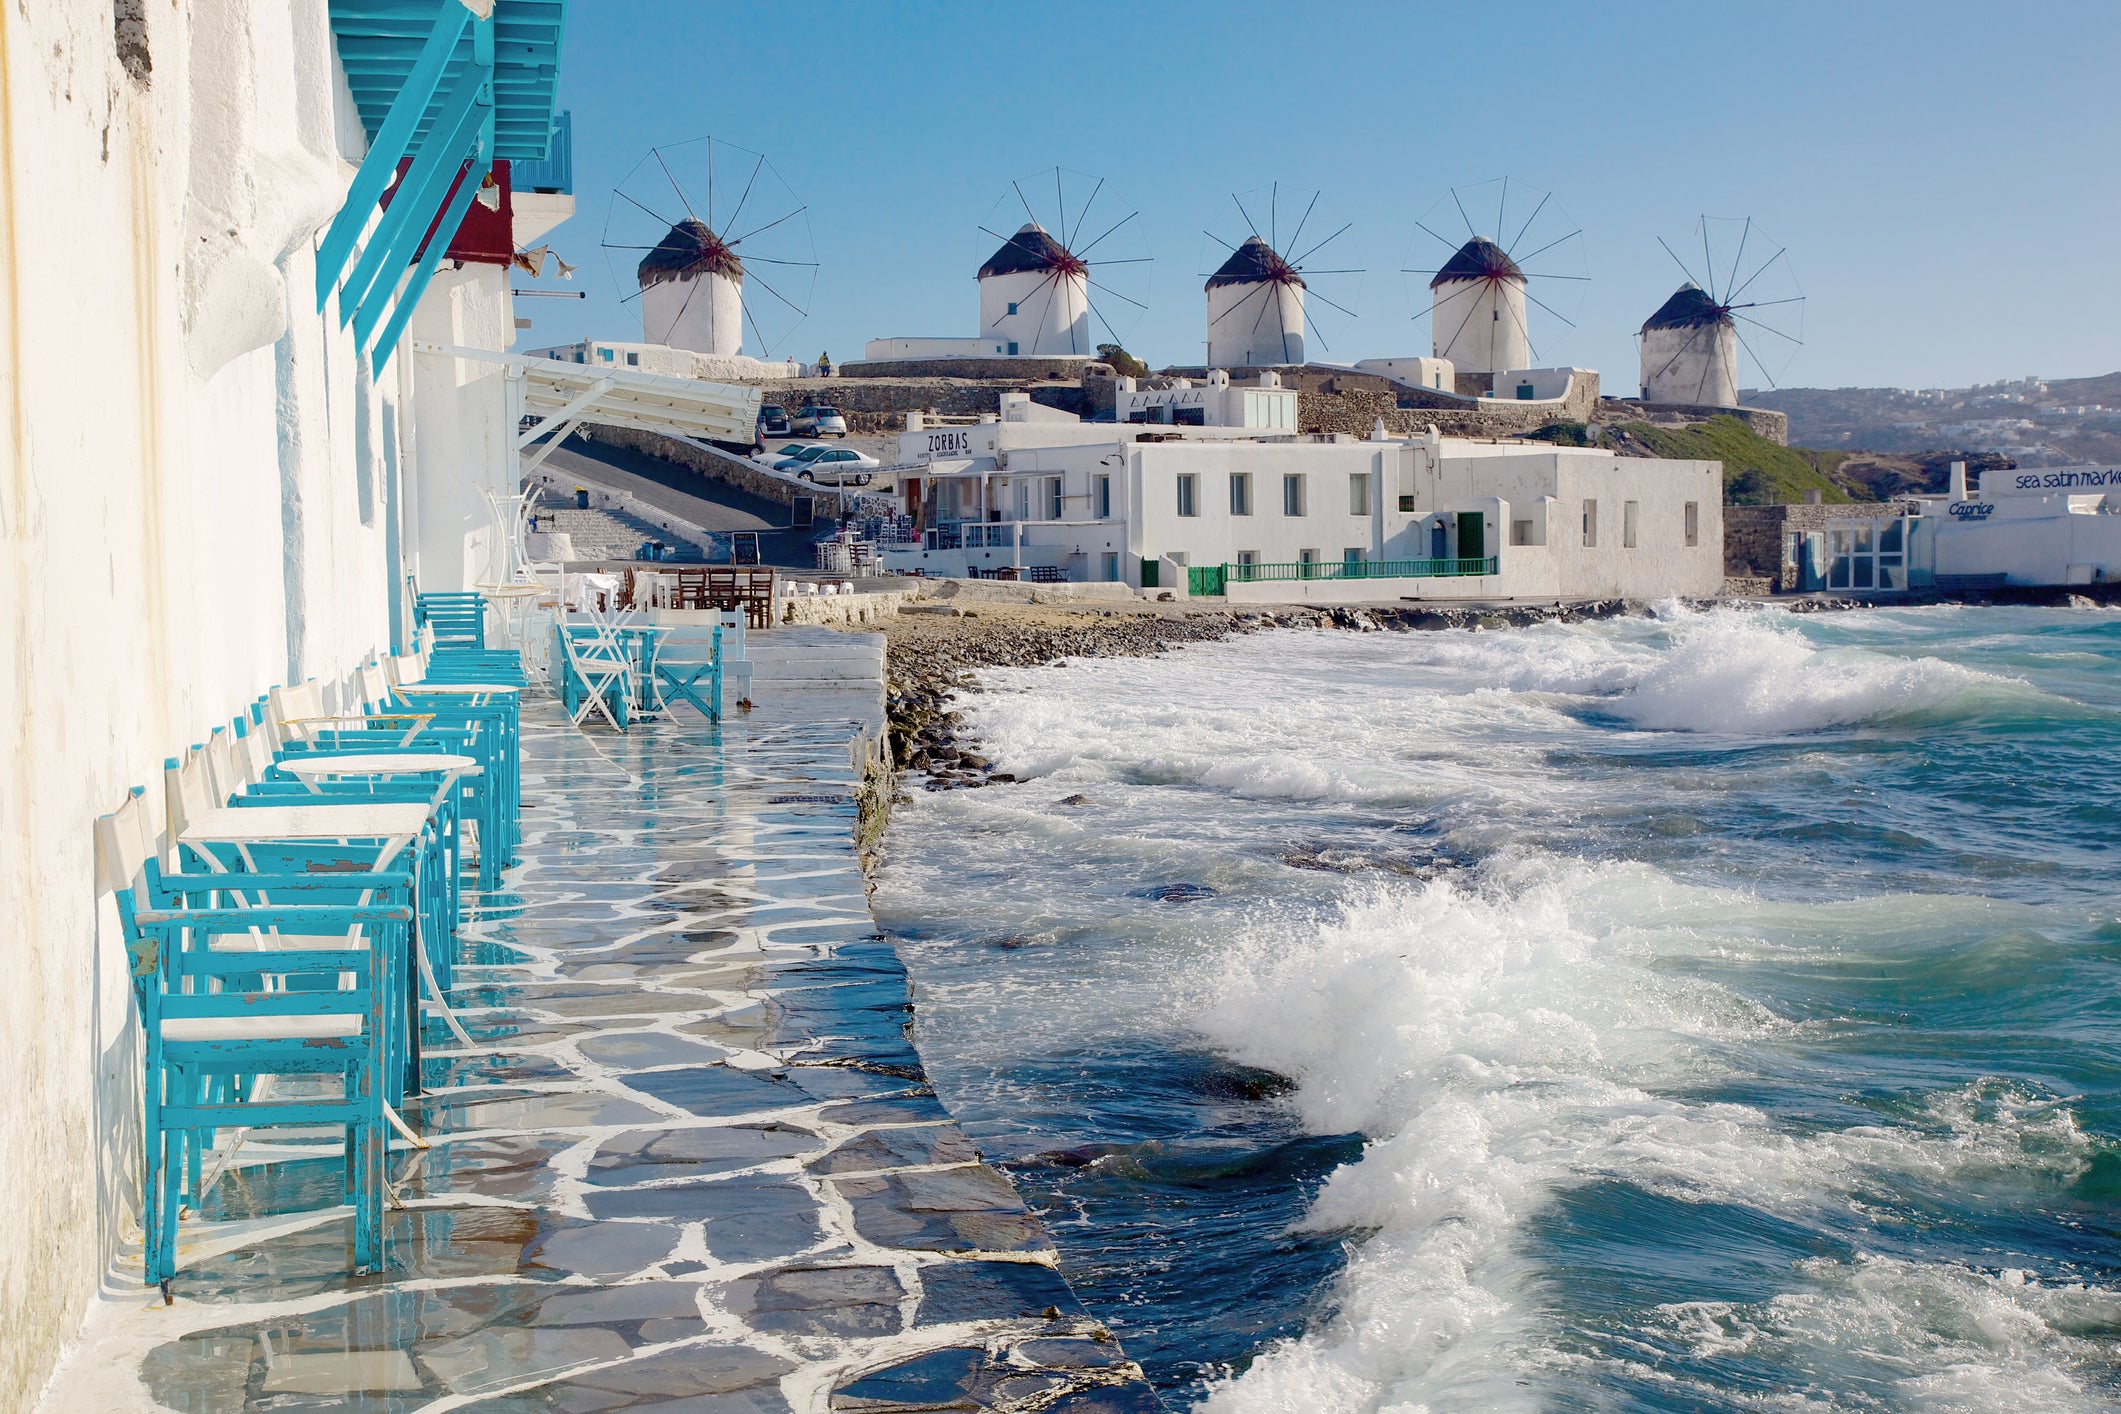 Cafe and windmills in Mykonos, Greece